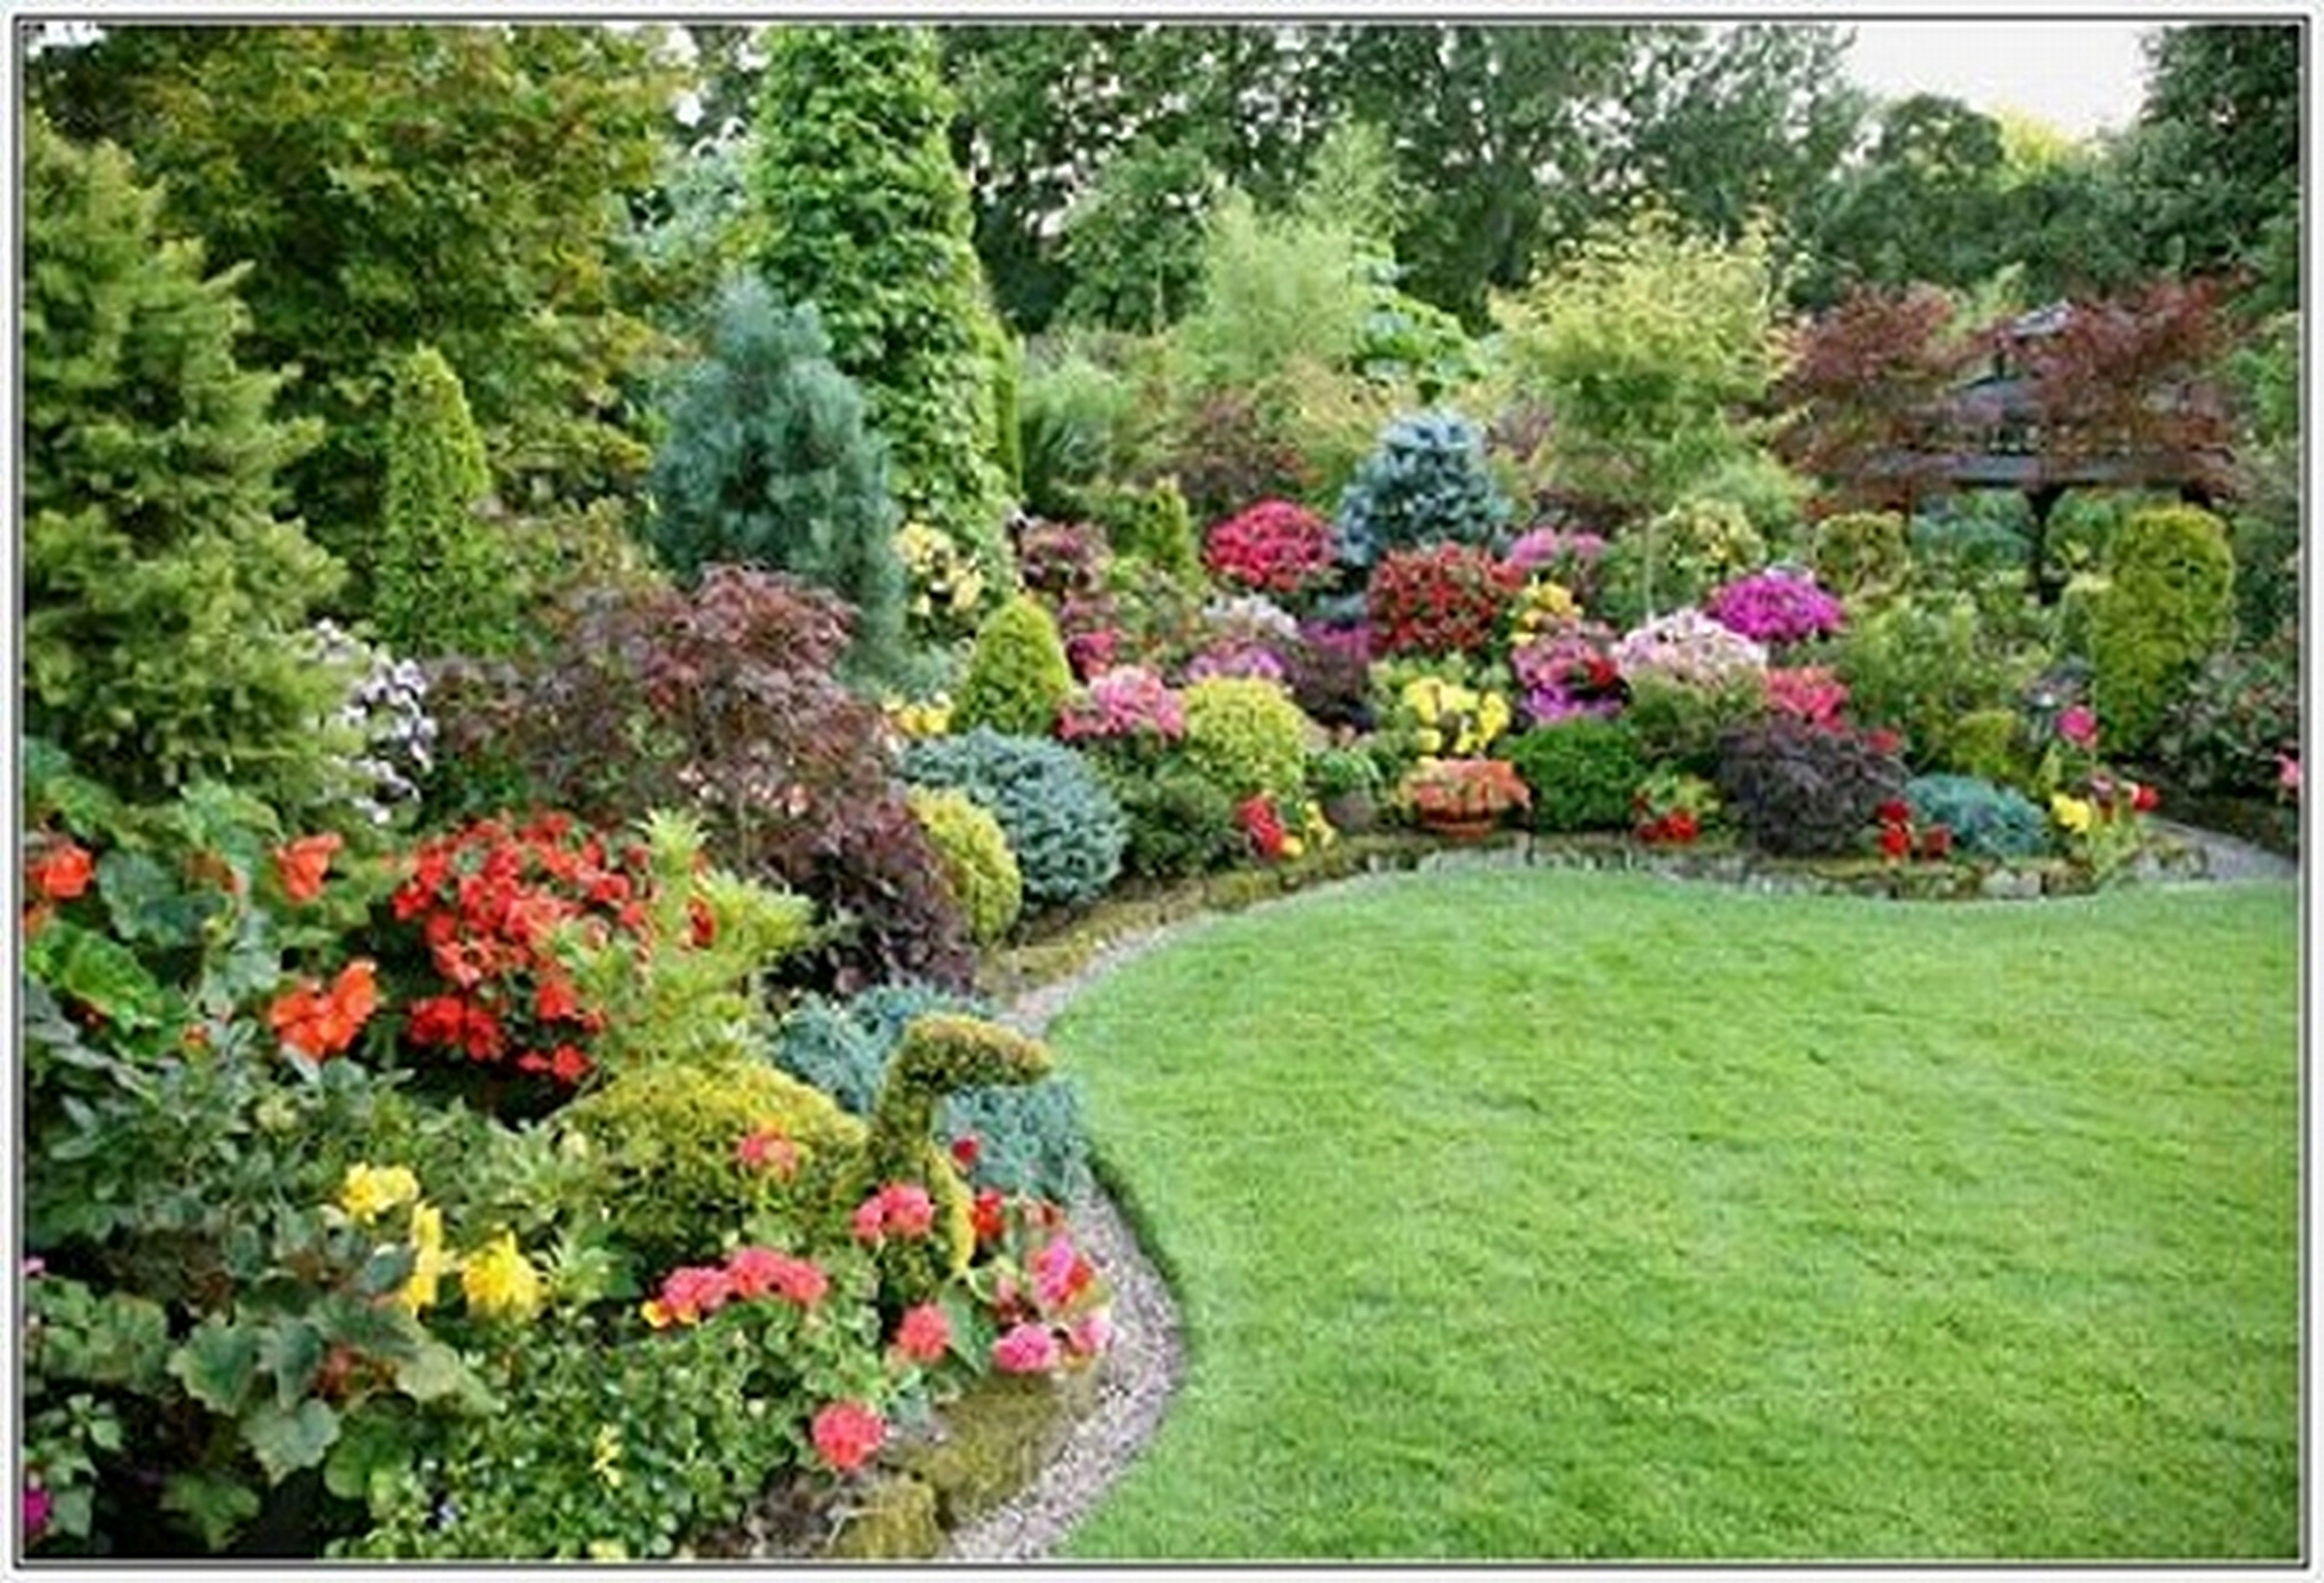 Reasons you should make the evergreen landscape your best choice